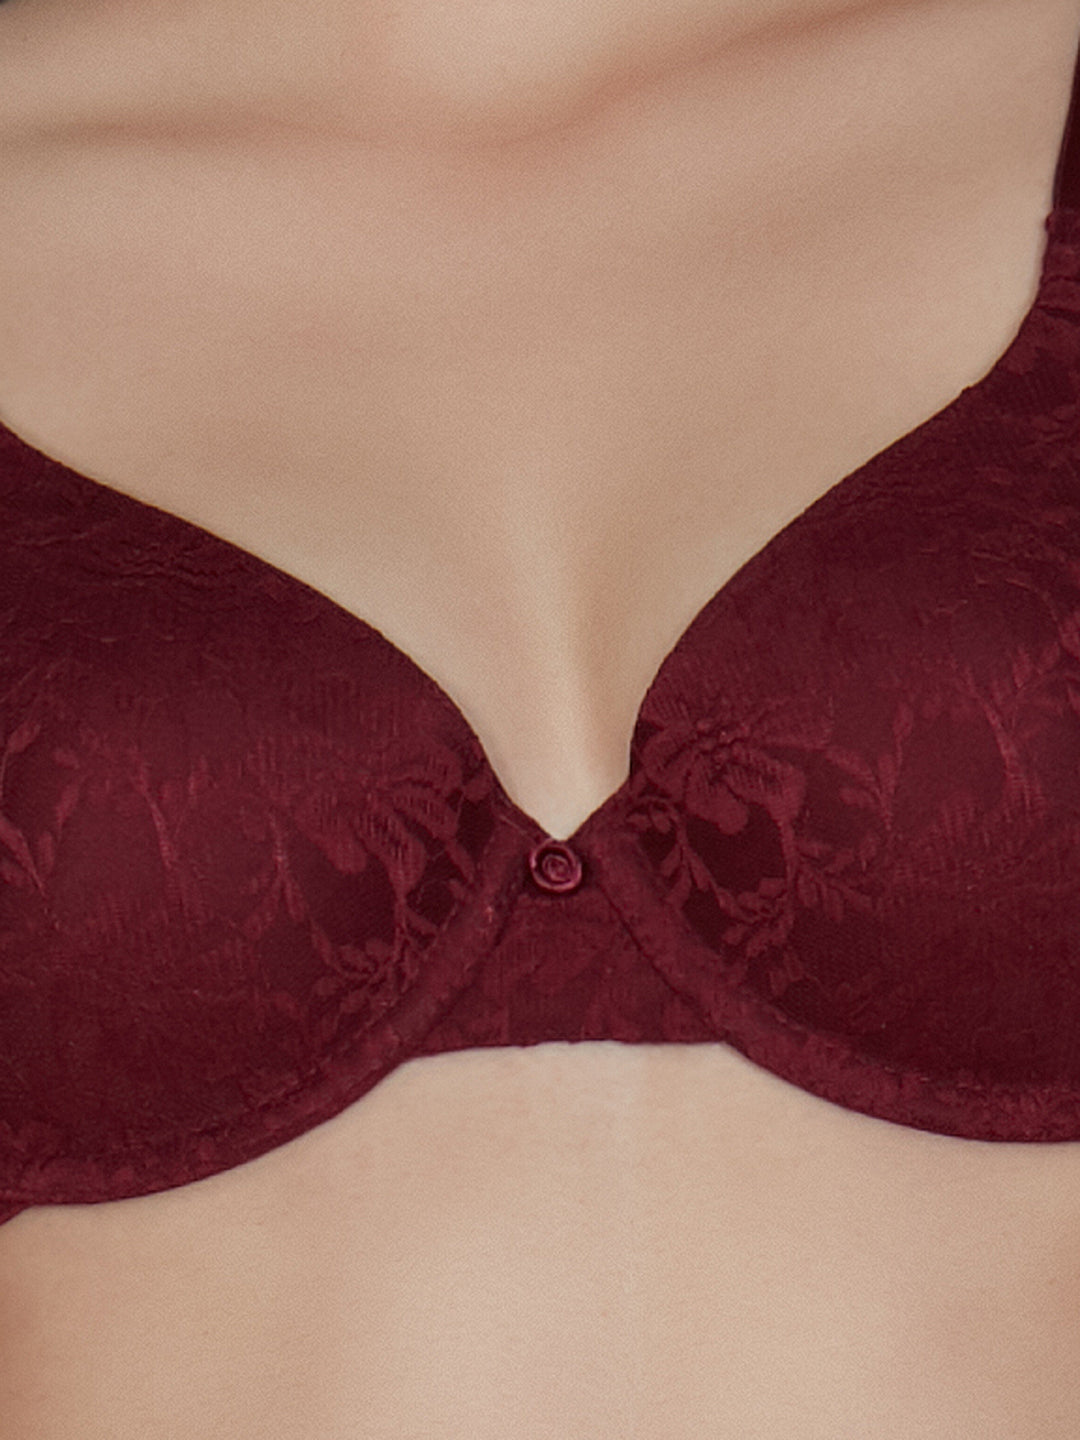 Floral Romance Padded Wired Bra - Maroon